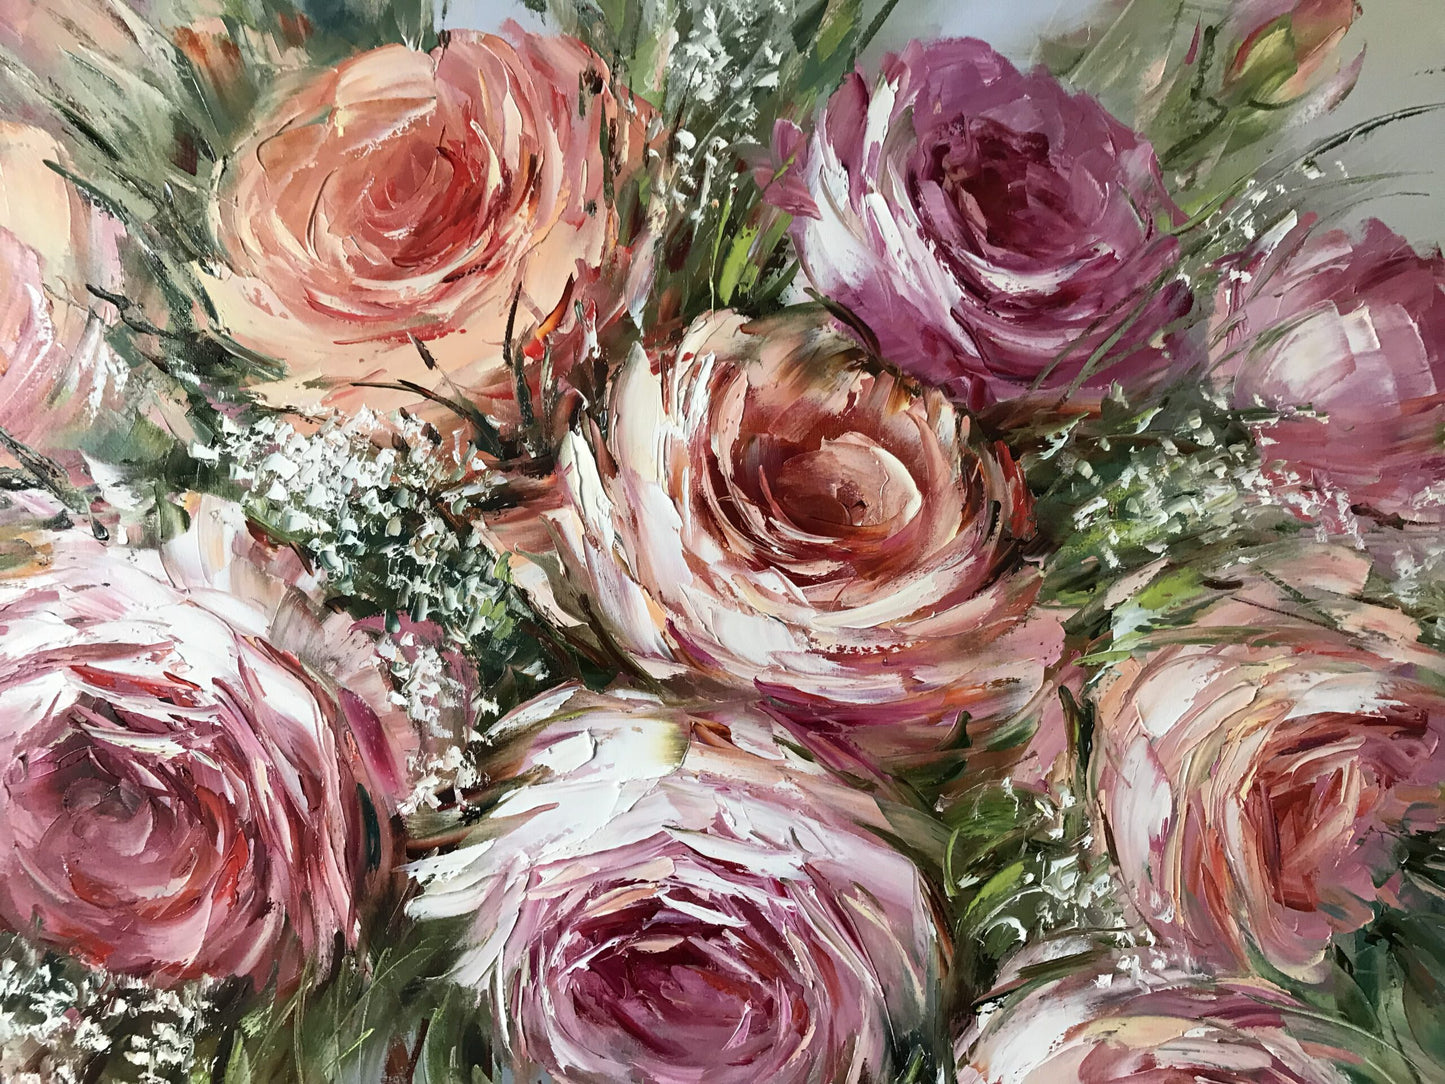 Pink Roses in a Vase Oil painting Original Large Floral Wall Decor Still Life Flowers in Vase Painting on Canvas Flower Artwork